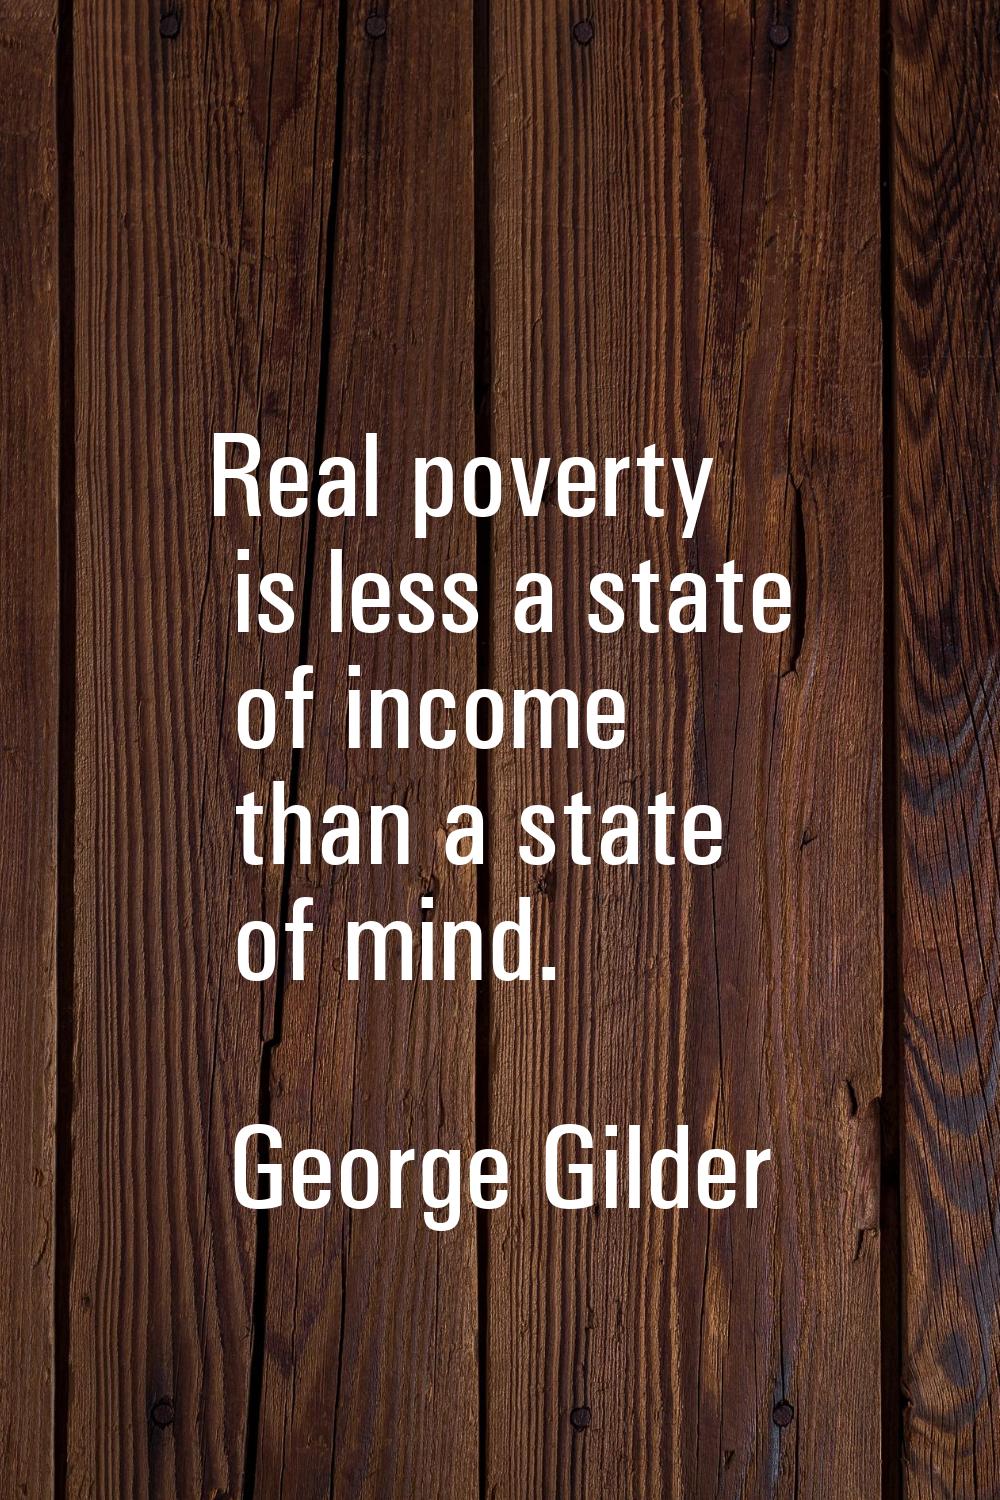 Real poverty is less a state of income than a state of mind.